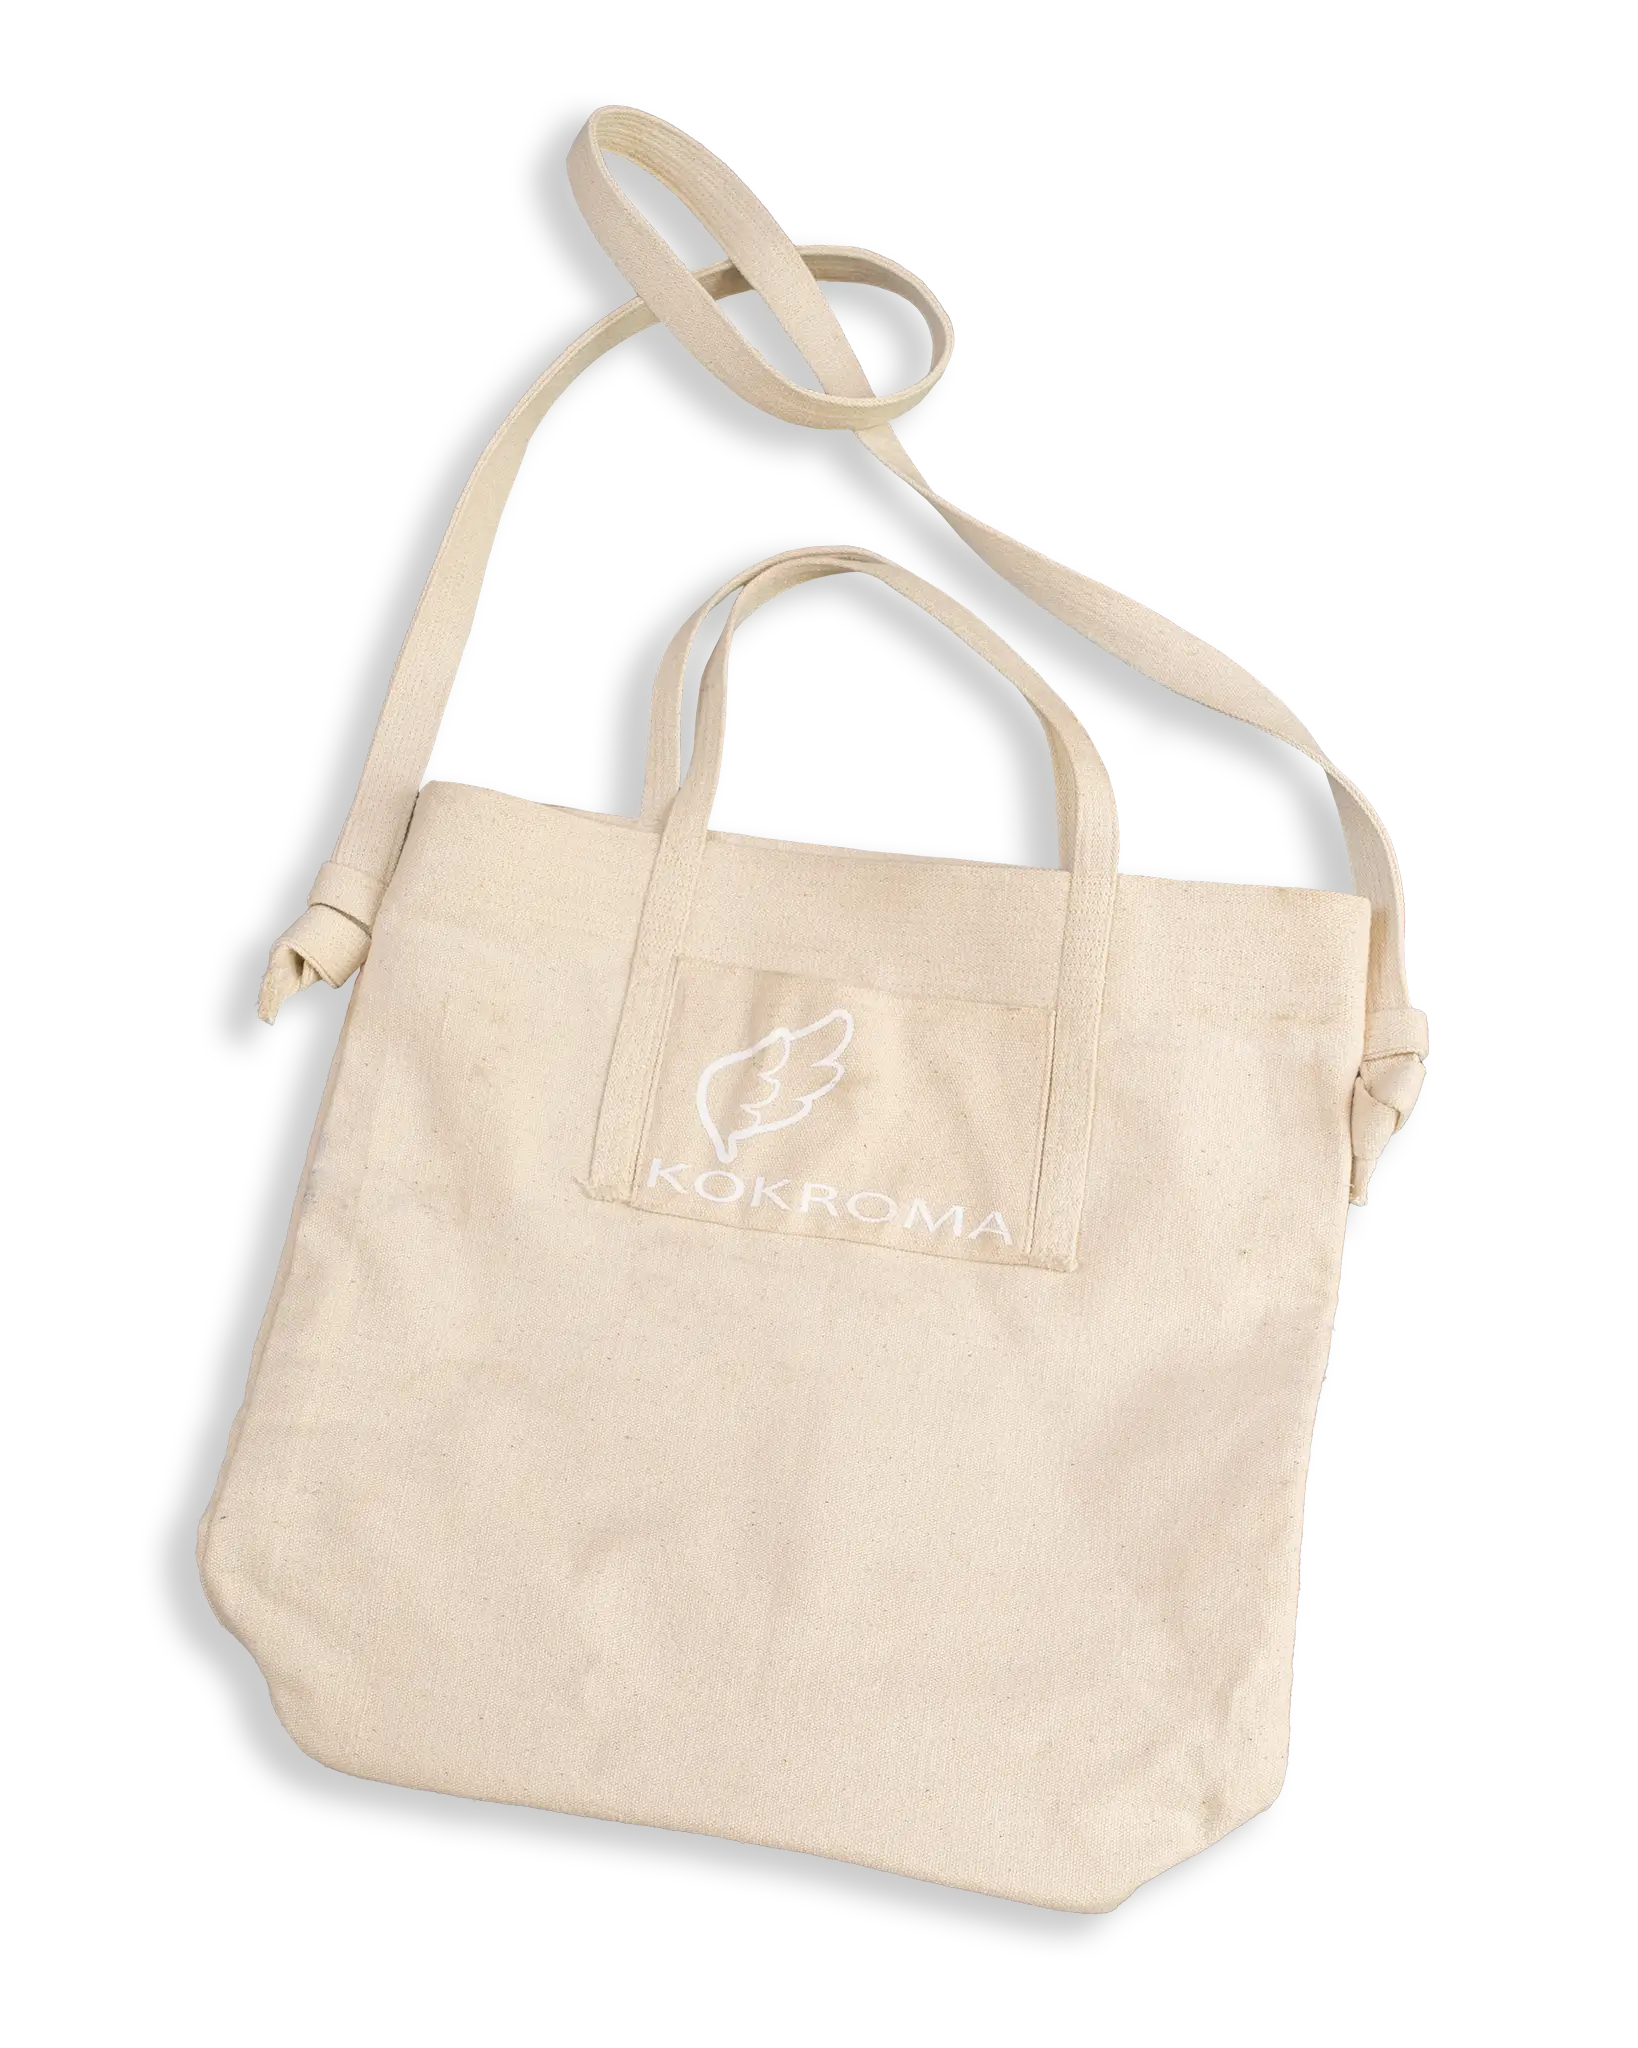 A strong and multi-purpose Tote Bag is designed for all including new mothers as a hospital bag. It is made with raw canvas with many pockets outside and inside.